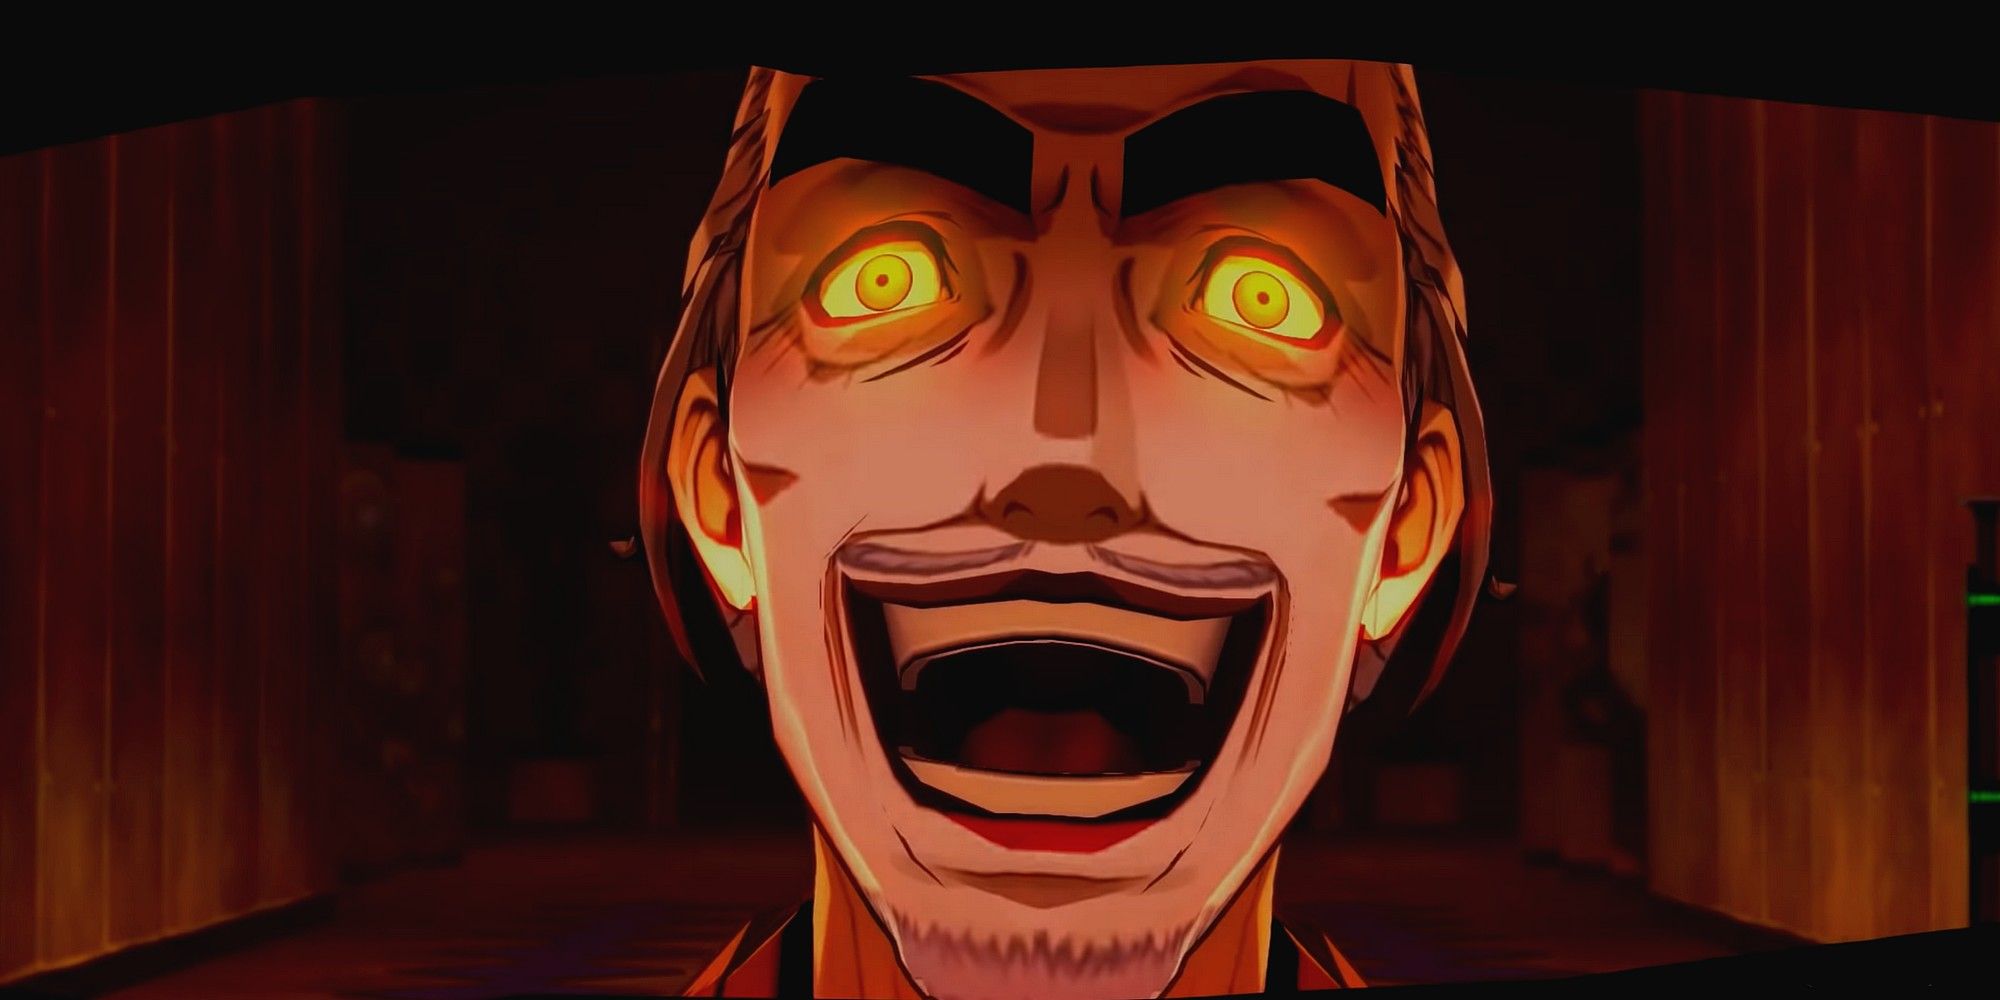 madarame laughing maniacly as he's about to transform for the boss fight